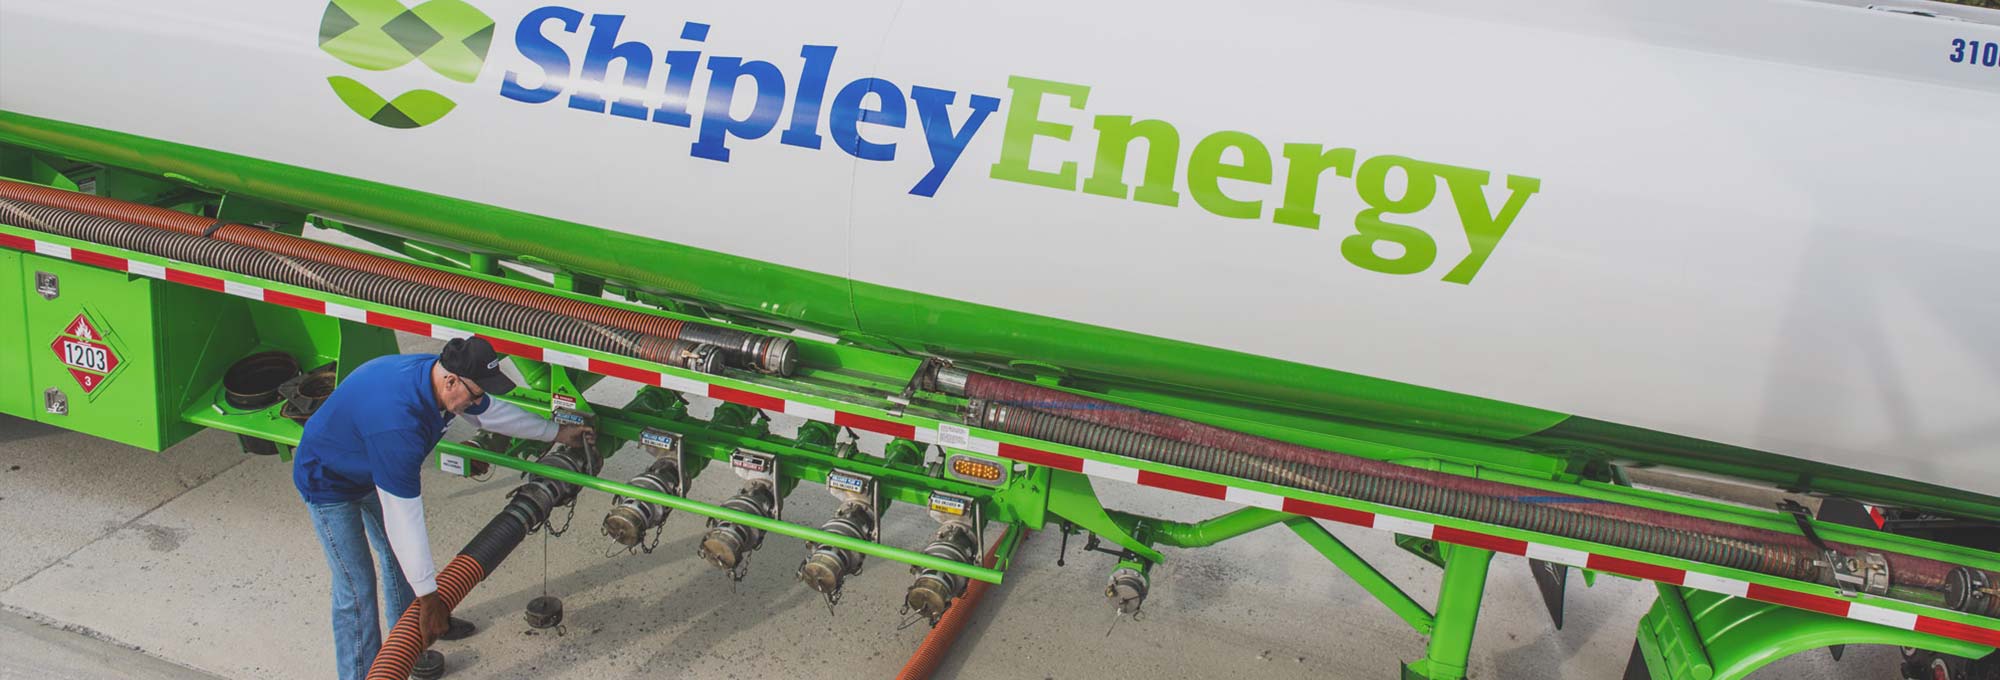 Stay Warm This Season With Shipley Energy